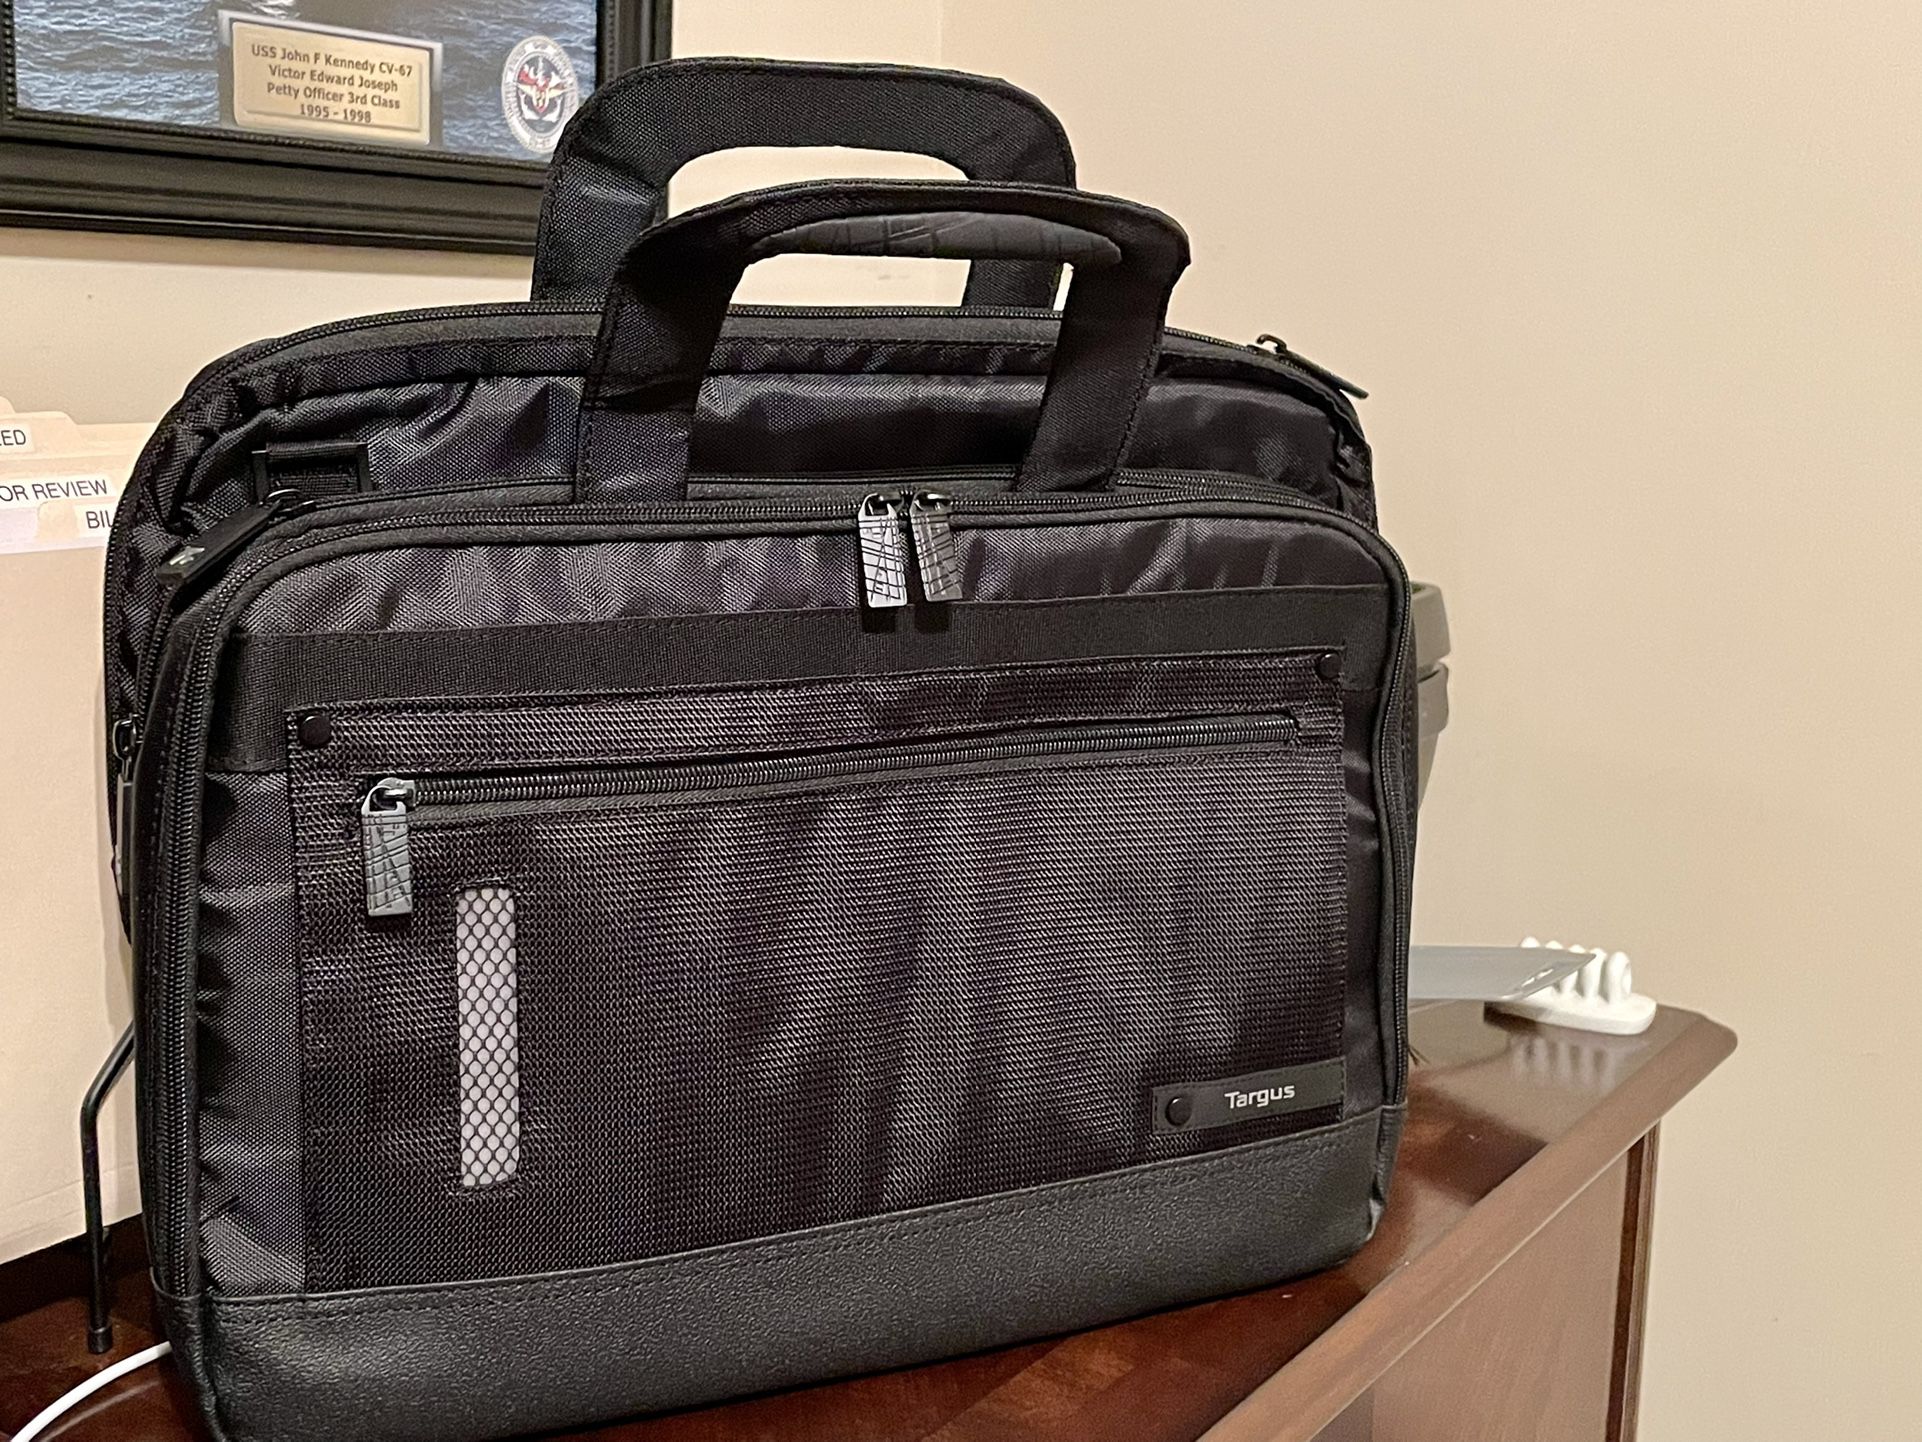 NEW Targus  Computer and Accessories Bag with FREE iPad Pro 12.9 2017 Case